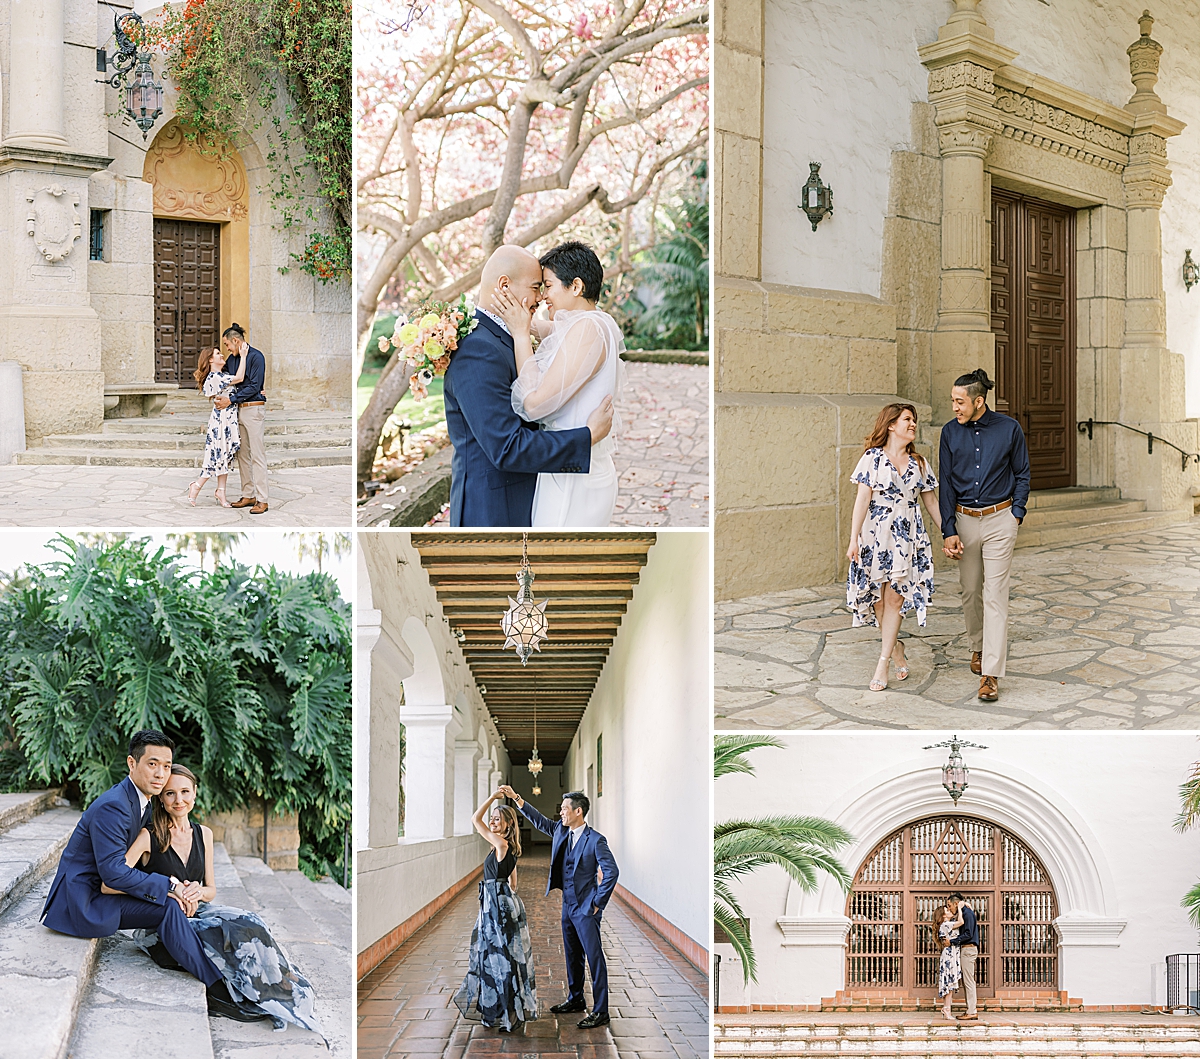 The Santa Barbara Courthouse is one of our favorite locations for Santa Barbara Engagement Photos